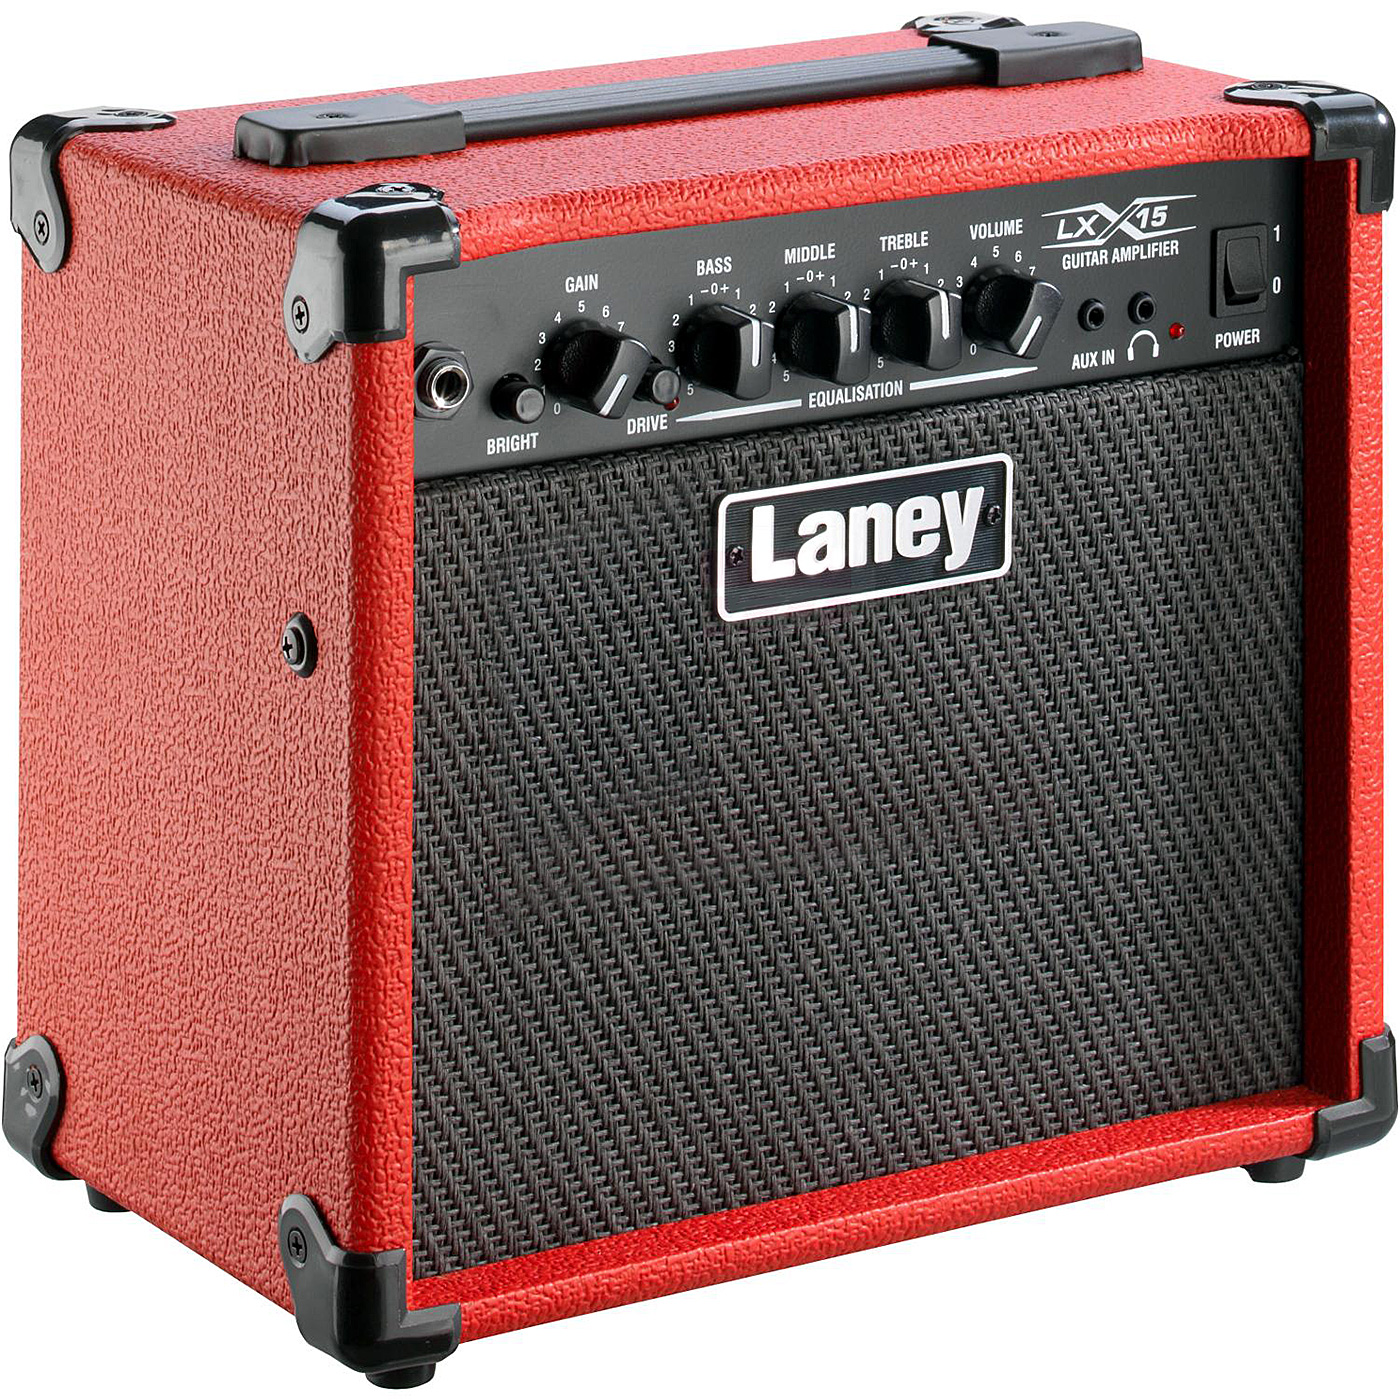 Laney Lx15 15w 2x5 Red 2016 - Electric guitar combo amp - Variation 1